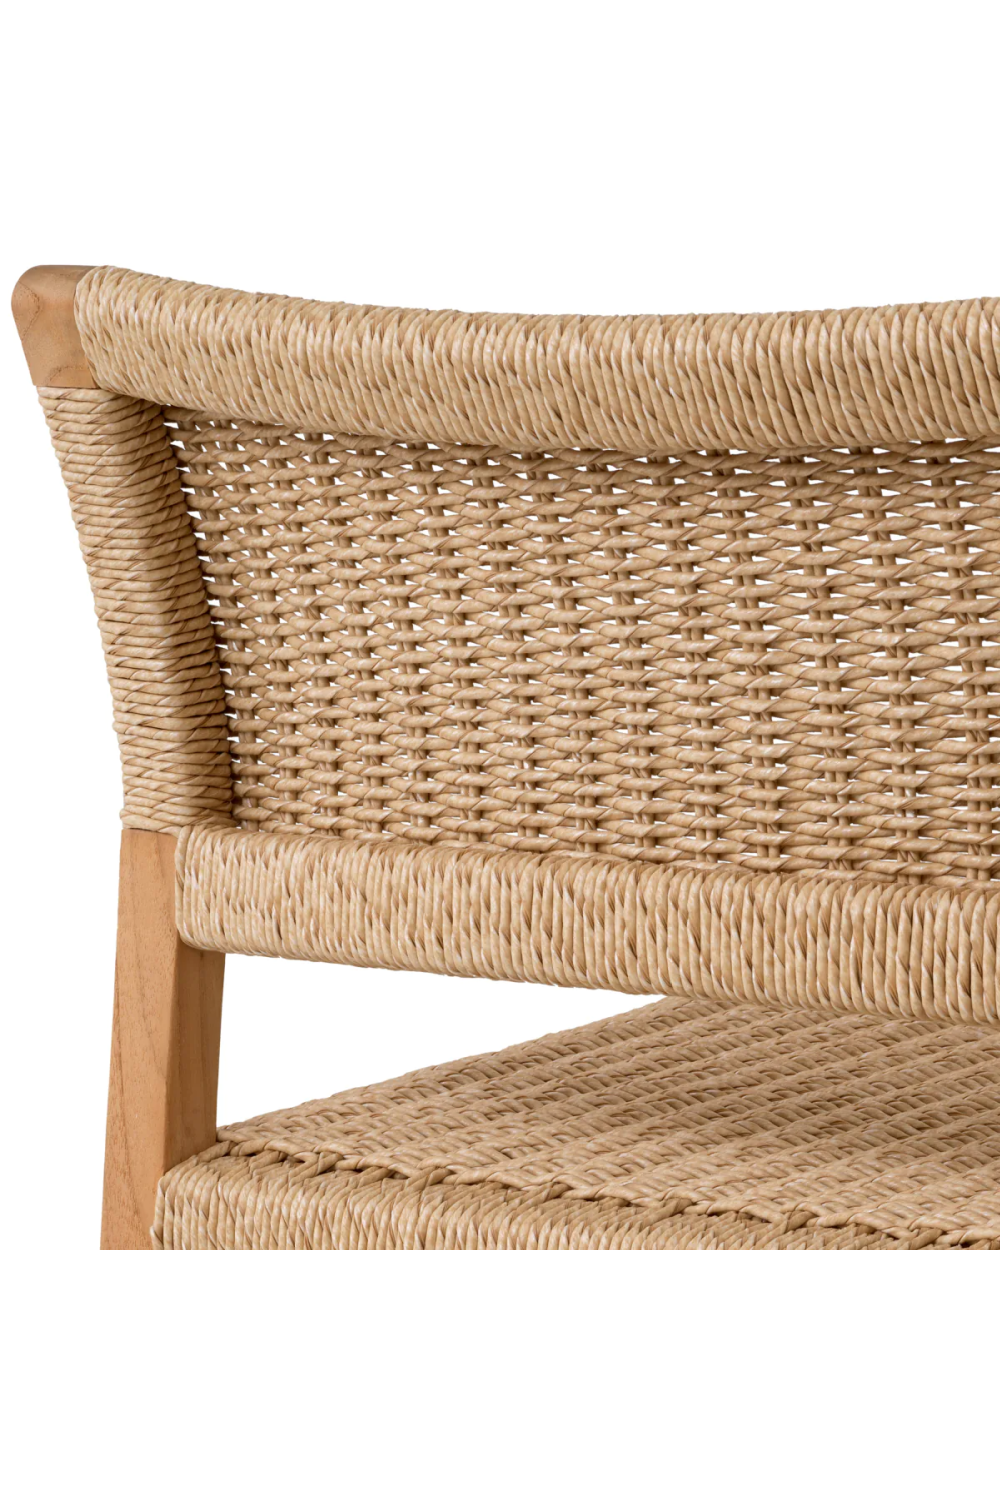 Wooden Weave Outdoor Dining Chair | Eichholtz Griffin | Oroa.com